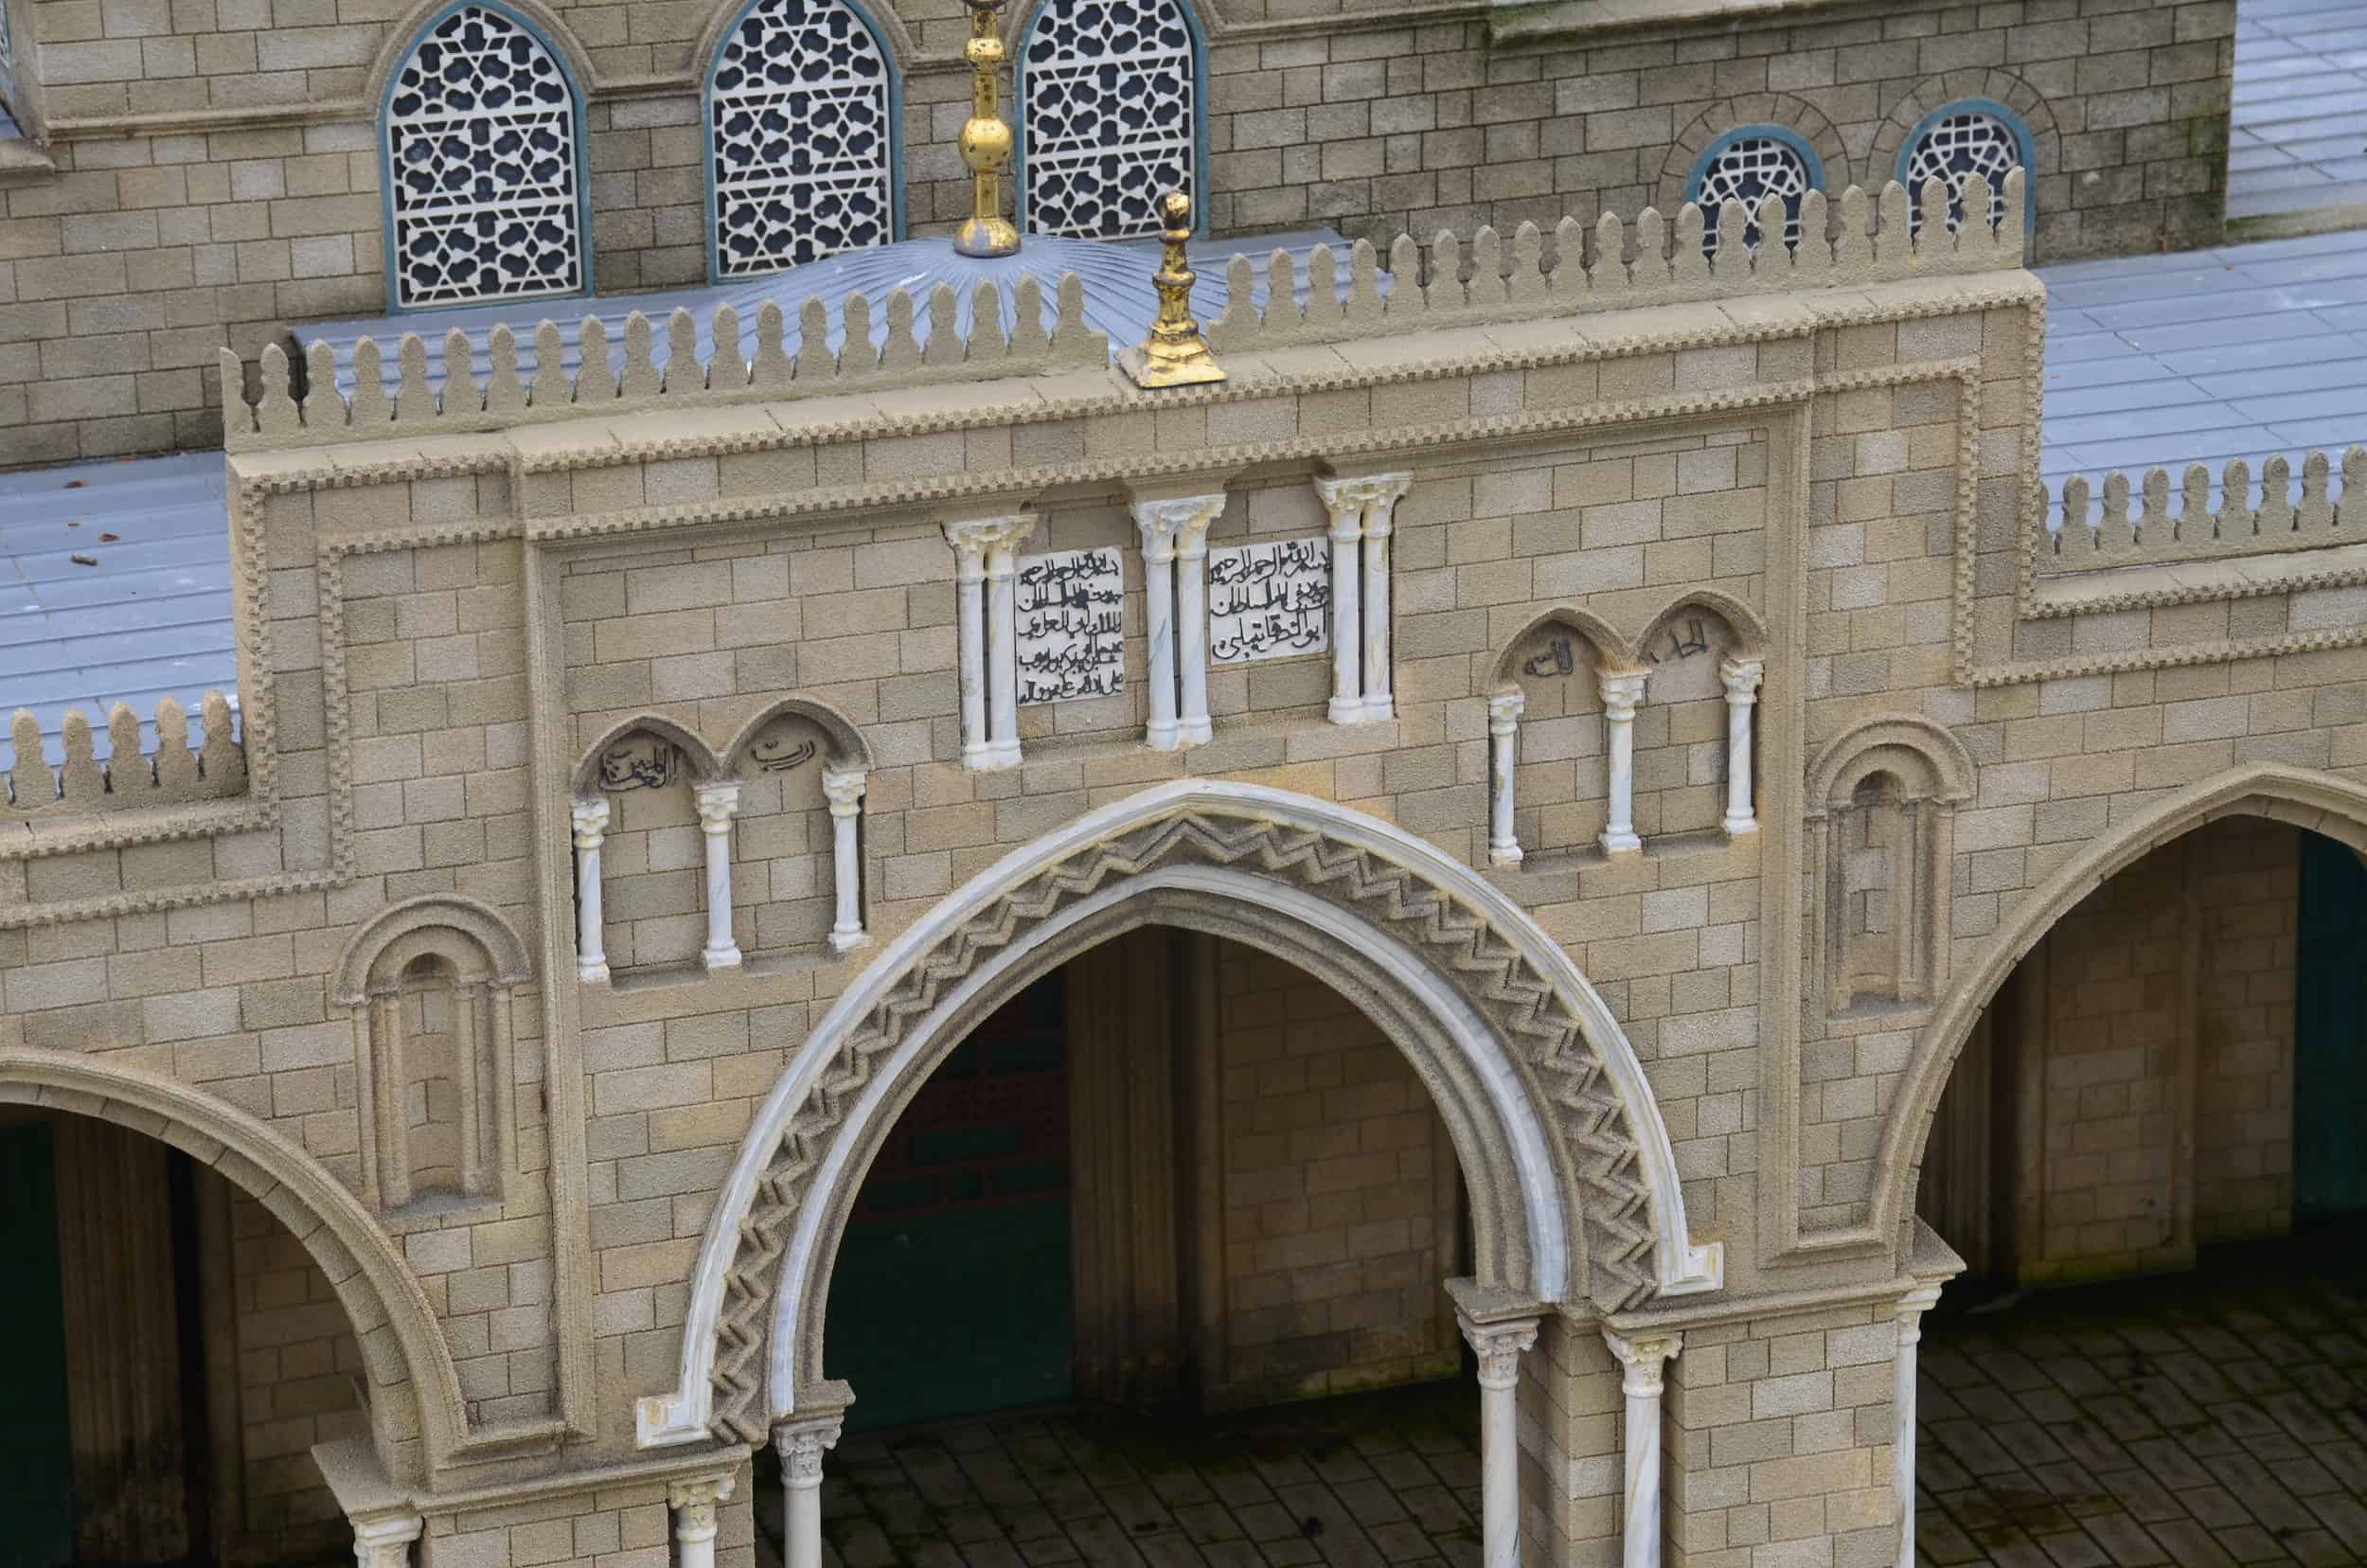 Model of the Al-Aqsa Mosque on the Temple Mount in Jerusalem, 8th century